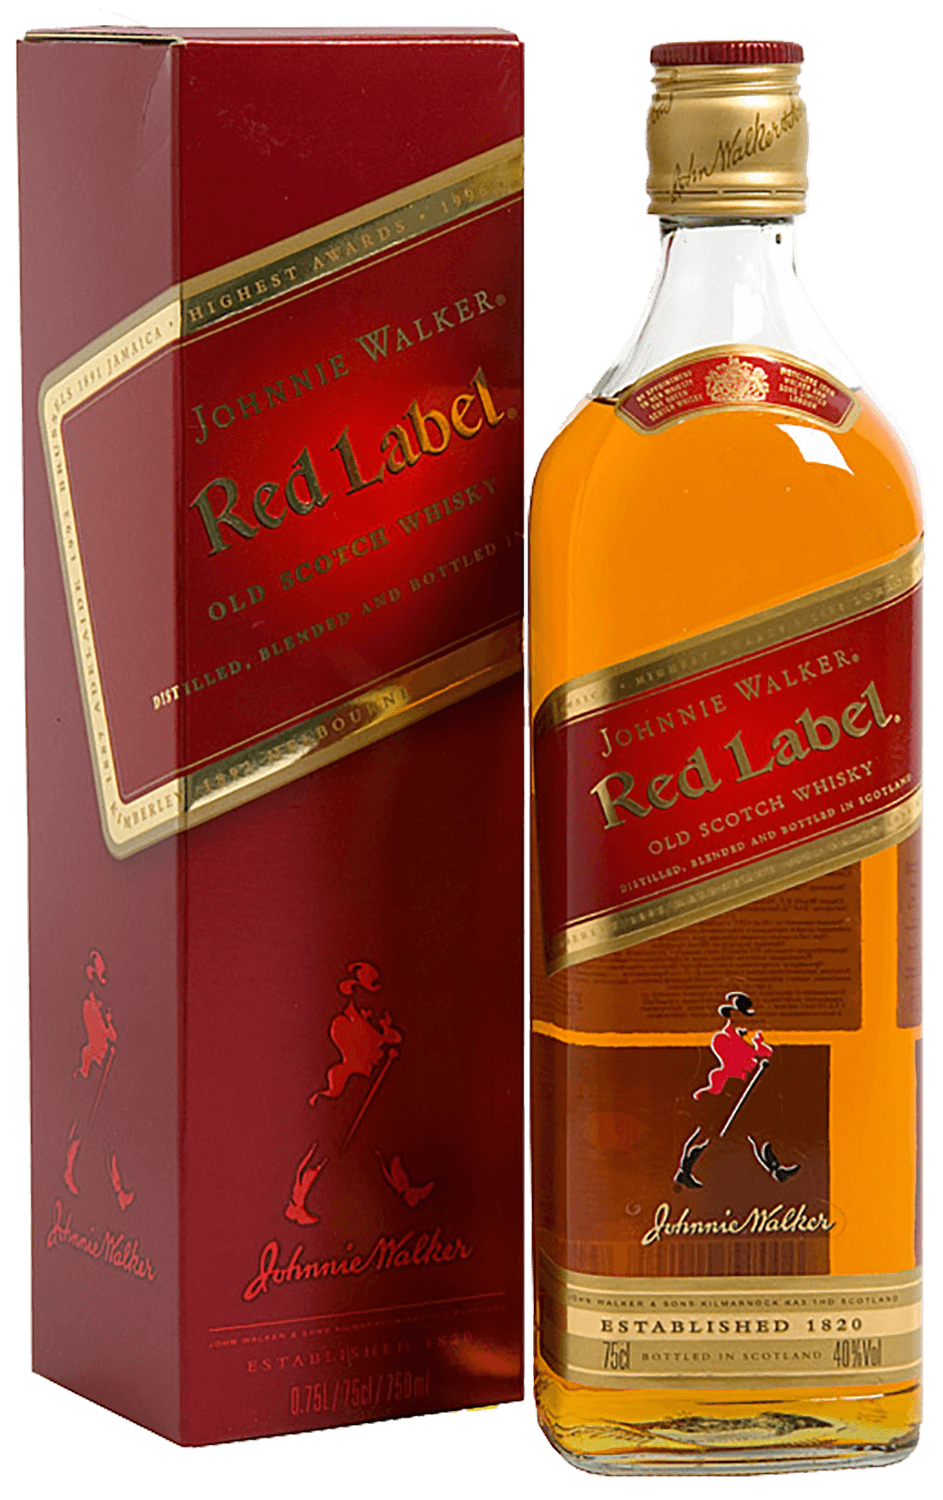 Johnnie Walker Red Label Blended Scotch Whisky (gift box) johnnie walker gold label blended scotch whisky gift box